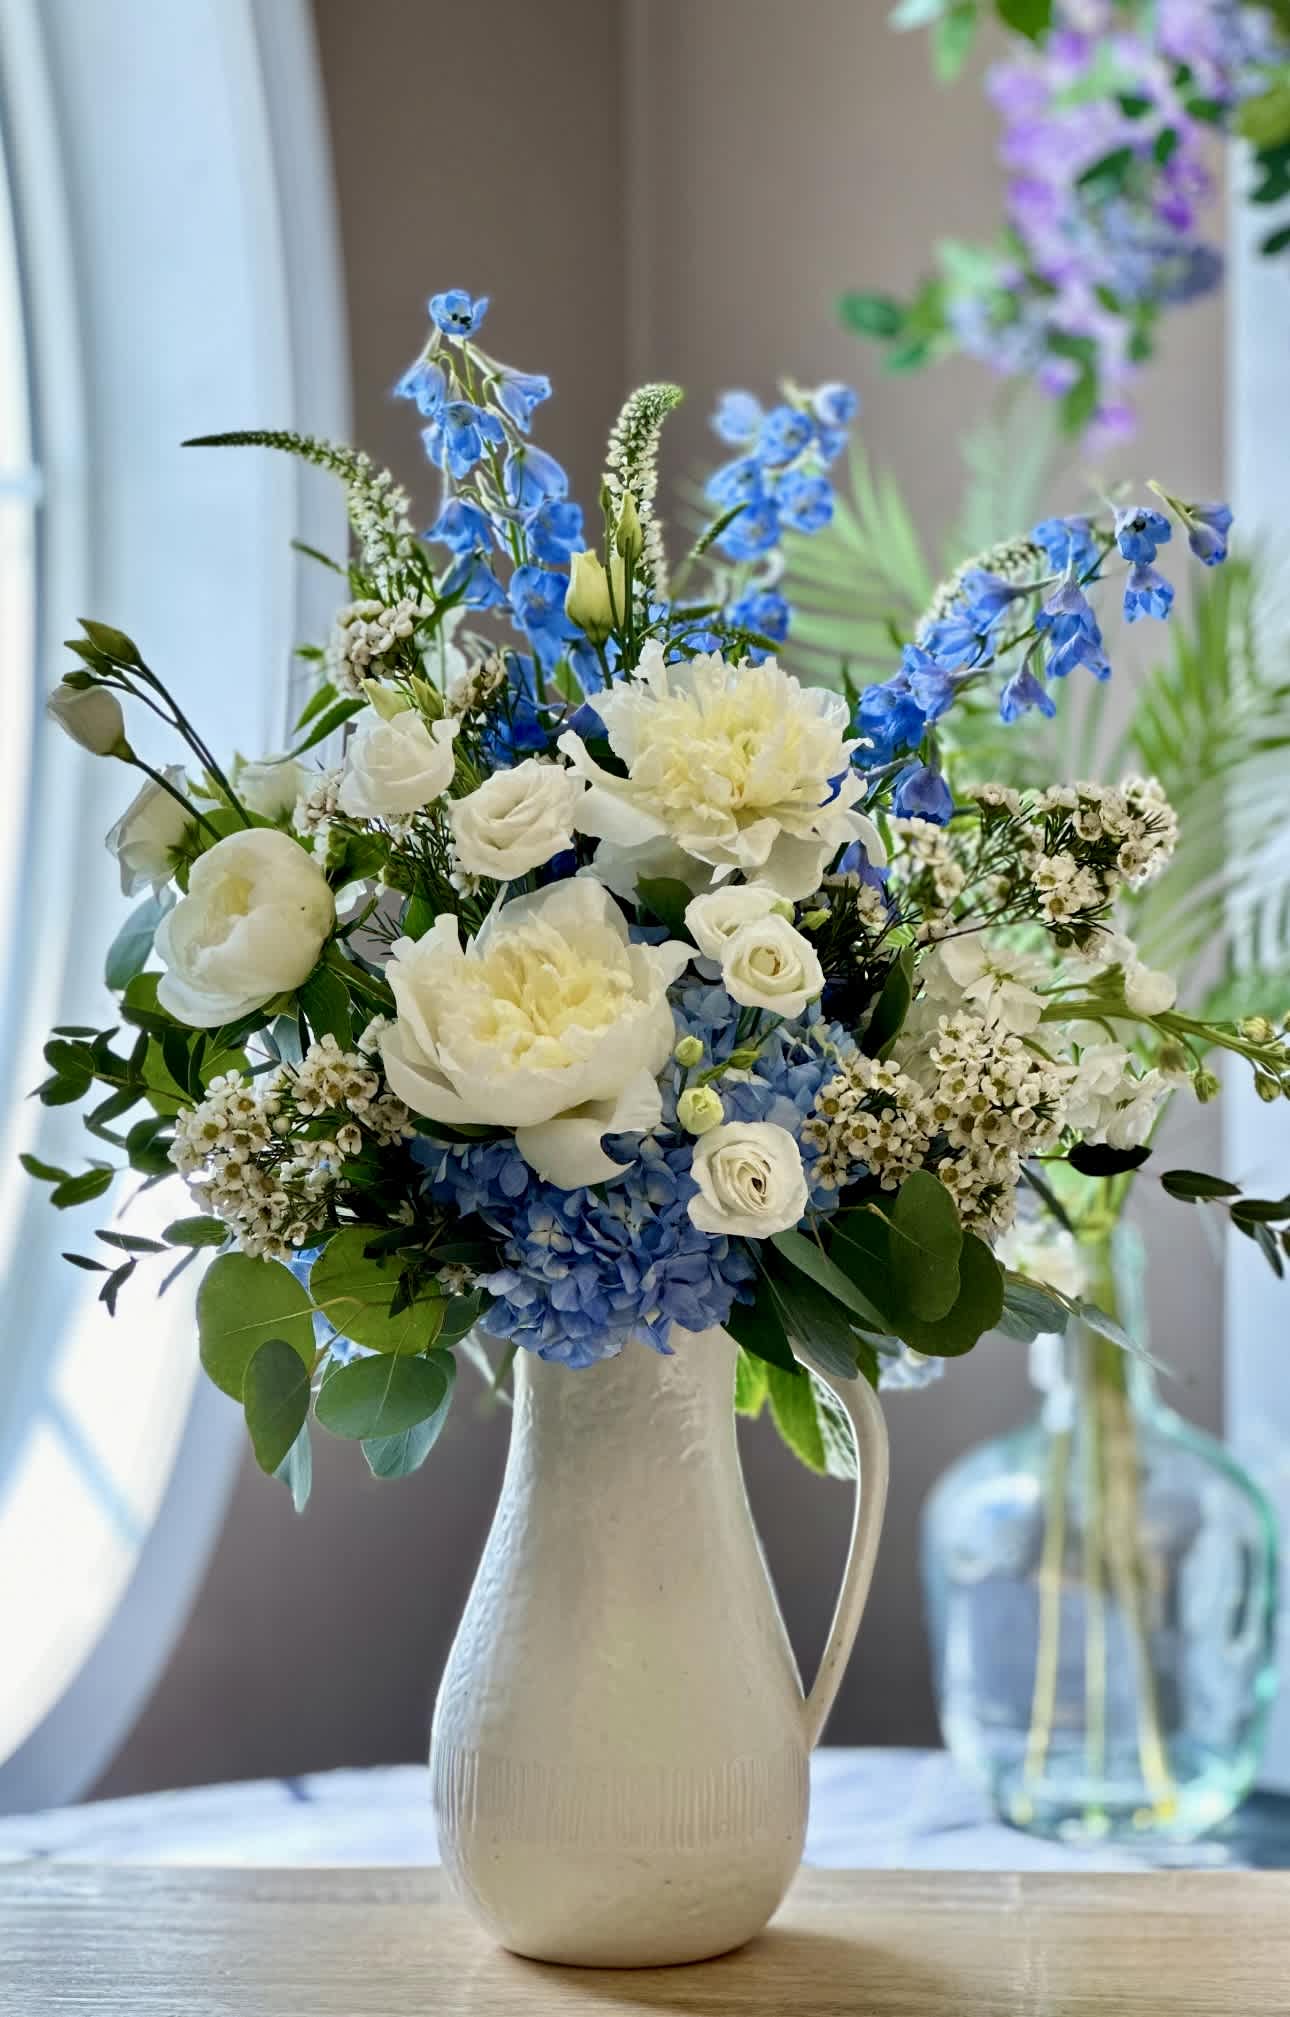 Ocean Dream's - Two gifts in one, a beautiful fresh flower arrangement and a keepsake white ceramic pitcher! Fresh flowers includes; hydrangea, lisianthus, wax flower, peonies, stock, delphinium, veronica and mixed greenery throughout. Flowers &amp; Colors may vary! AVAILABLE FOR LOCAL DELIVERY ONLY!!!